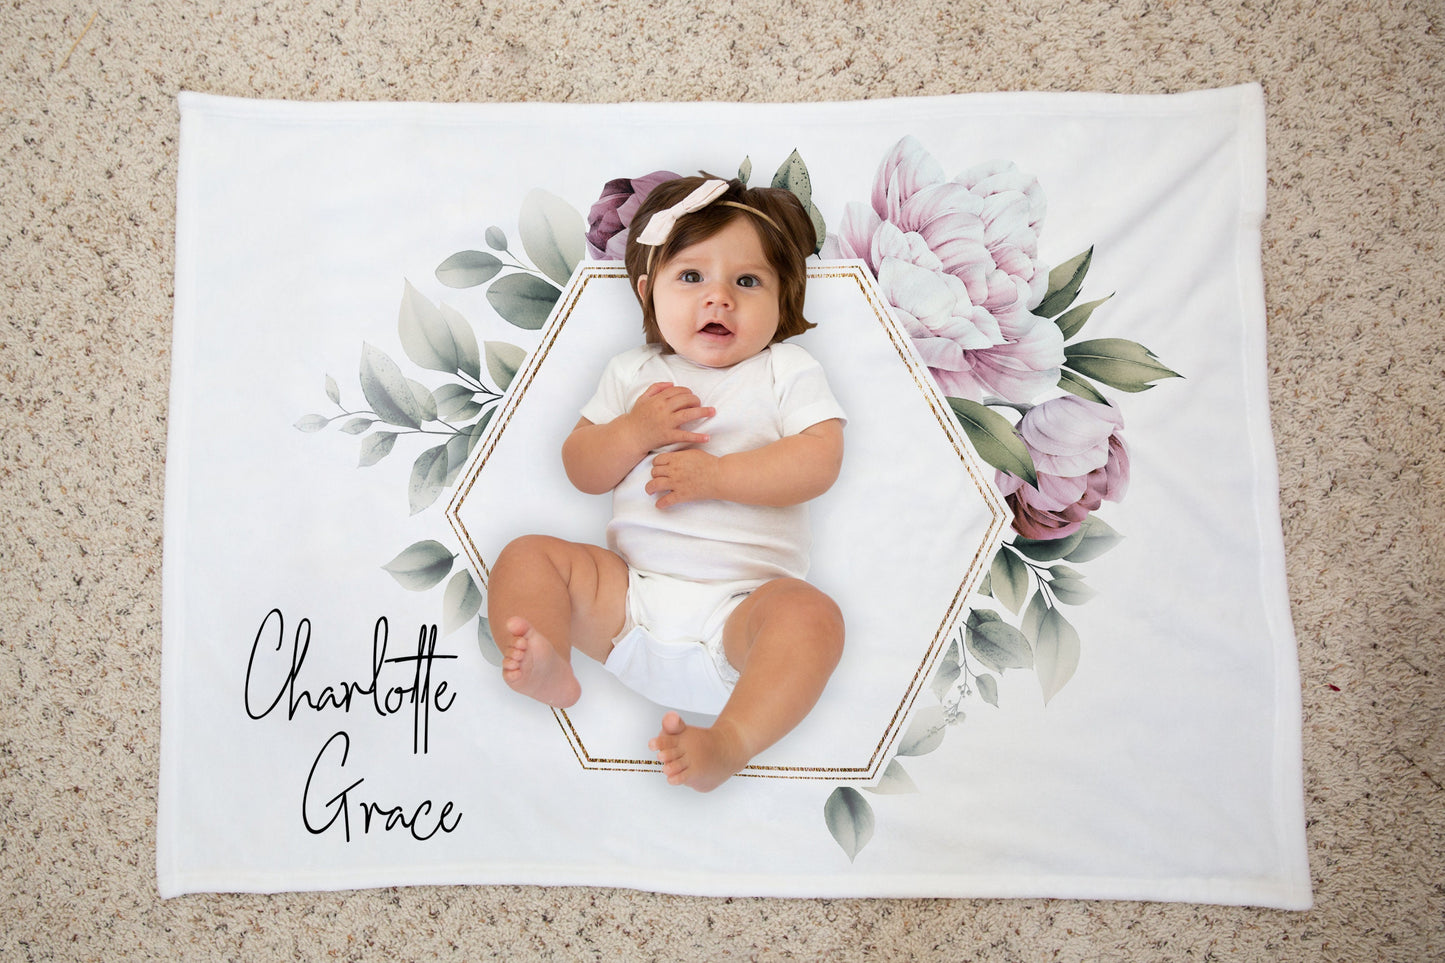 Personalized Baby Blanket, Baby Shower Gift, Photo Prop, Milestone Blanket, Watch Me Grow, Personalized Baby Gift, Vintage Floral,  Nursery